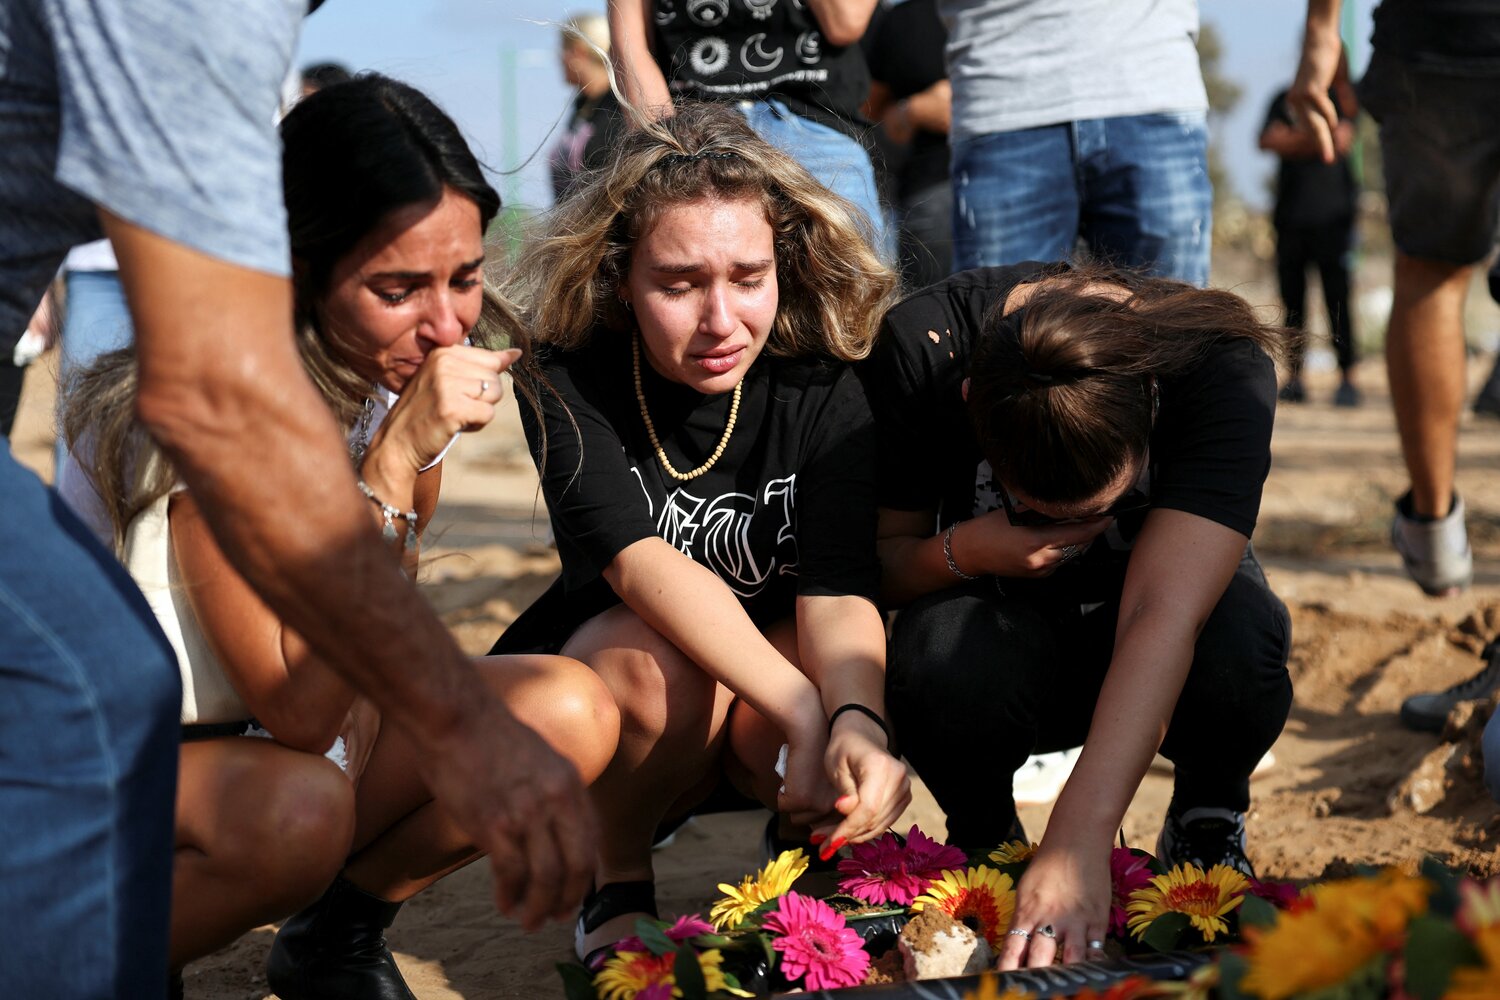 People mourn at the graveside of Eden Guez, during her funeral in Ashkelon, i Israel, October 10, 2023, who was killed as she attended a festival that was attacked by Hamas gunmen from Gaza. Israel increased airstrikes on the Gaza Strip and sealed it off from food, fuel and other supplies Monday in retaliation for a bloody incursion by Hamas militants, as the war’s death toll rose to nearly 1,600 on both sides. Hamas also escalated the conflict, pledging to kill captured Israelis if attacks targeted civilians without warnings.